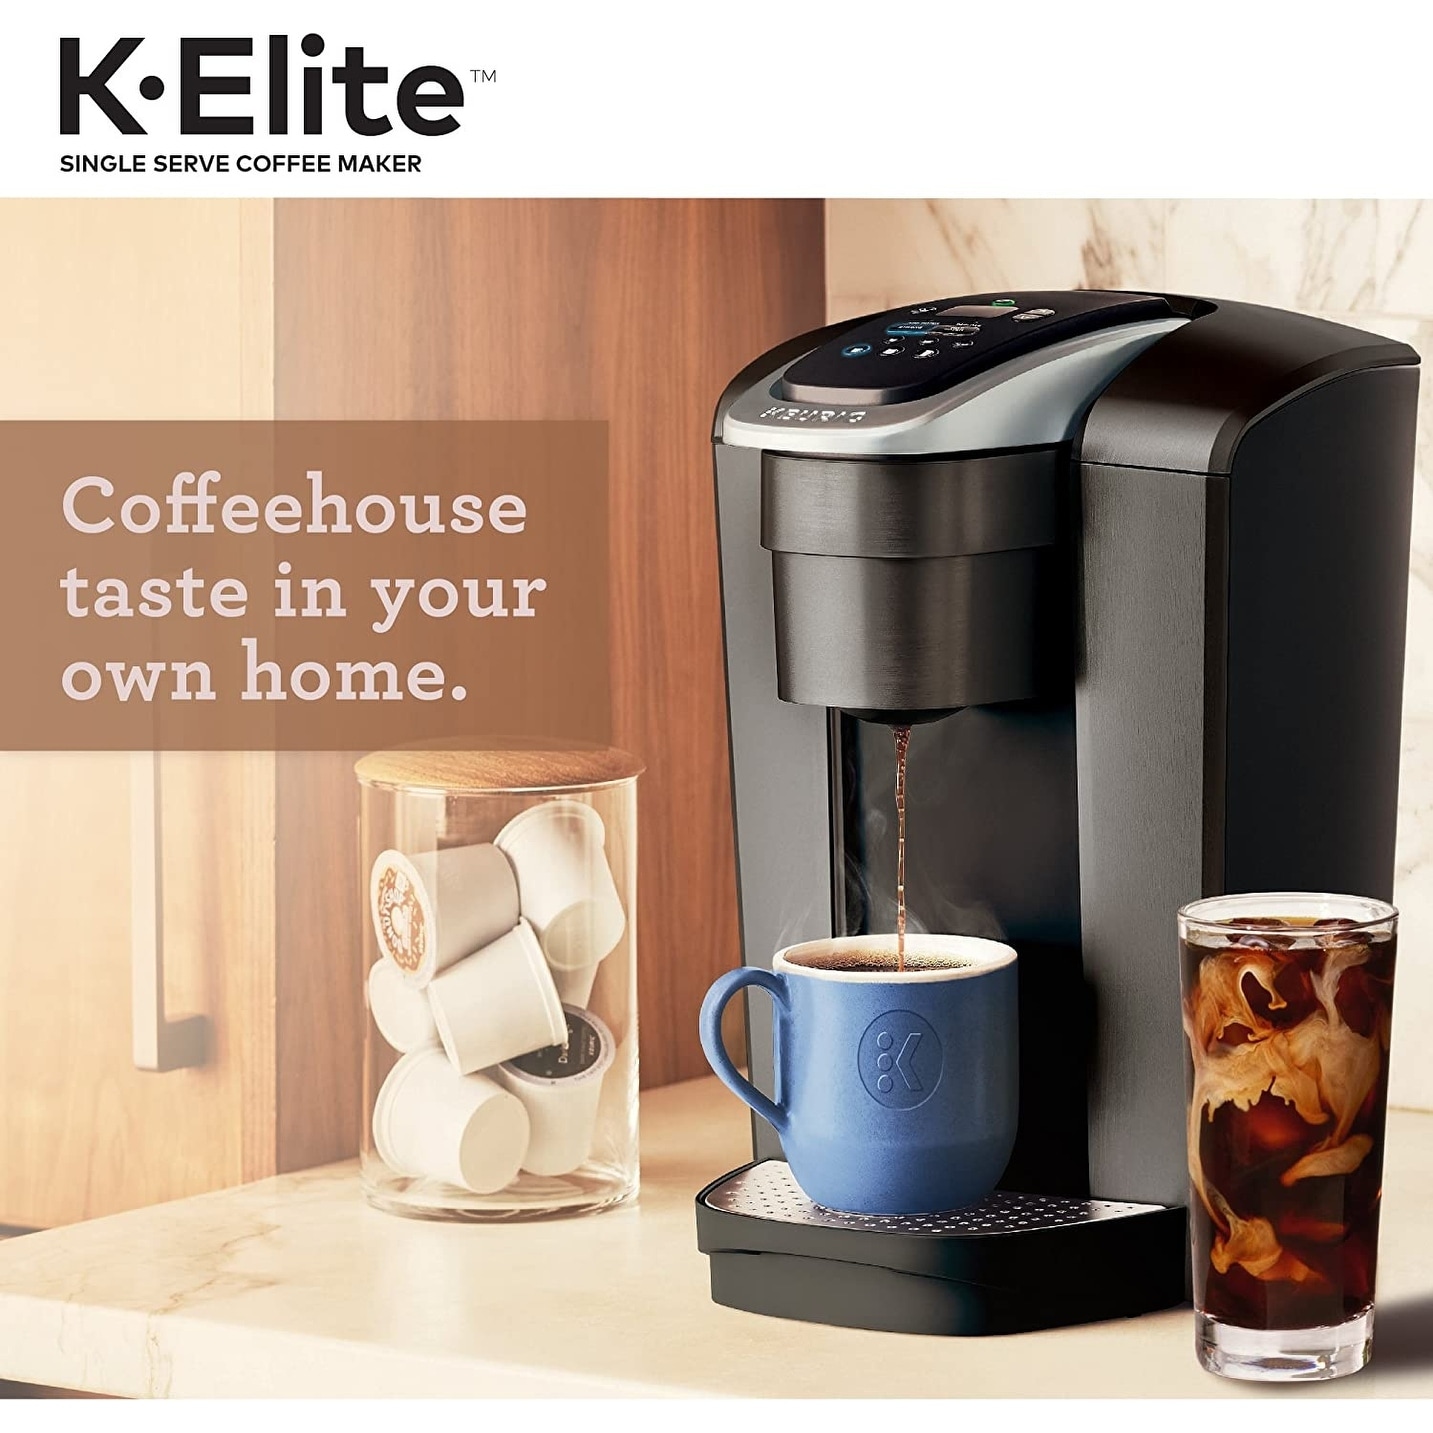 https://ak1.ostkcdn.com/images/products/is/images/direct/5e0e20f4e286f4816b50bed80ecfb718e31ea3d5/Keurig-K-Elite-Coffee-Maker%2C-Single-Serve-K-Cup-Pod-Coffee-Brewer%2C-With-Iced-Coffee-Capability.jpg